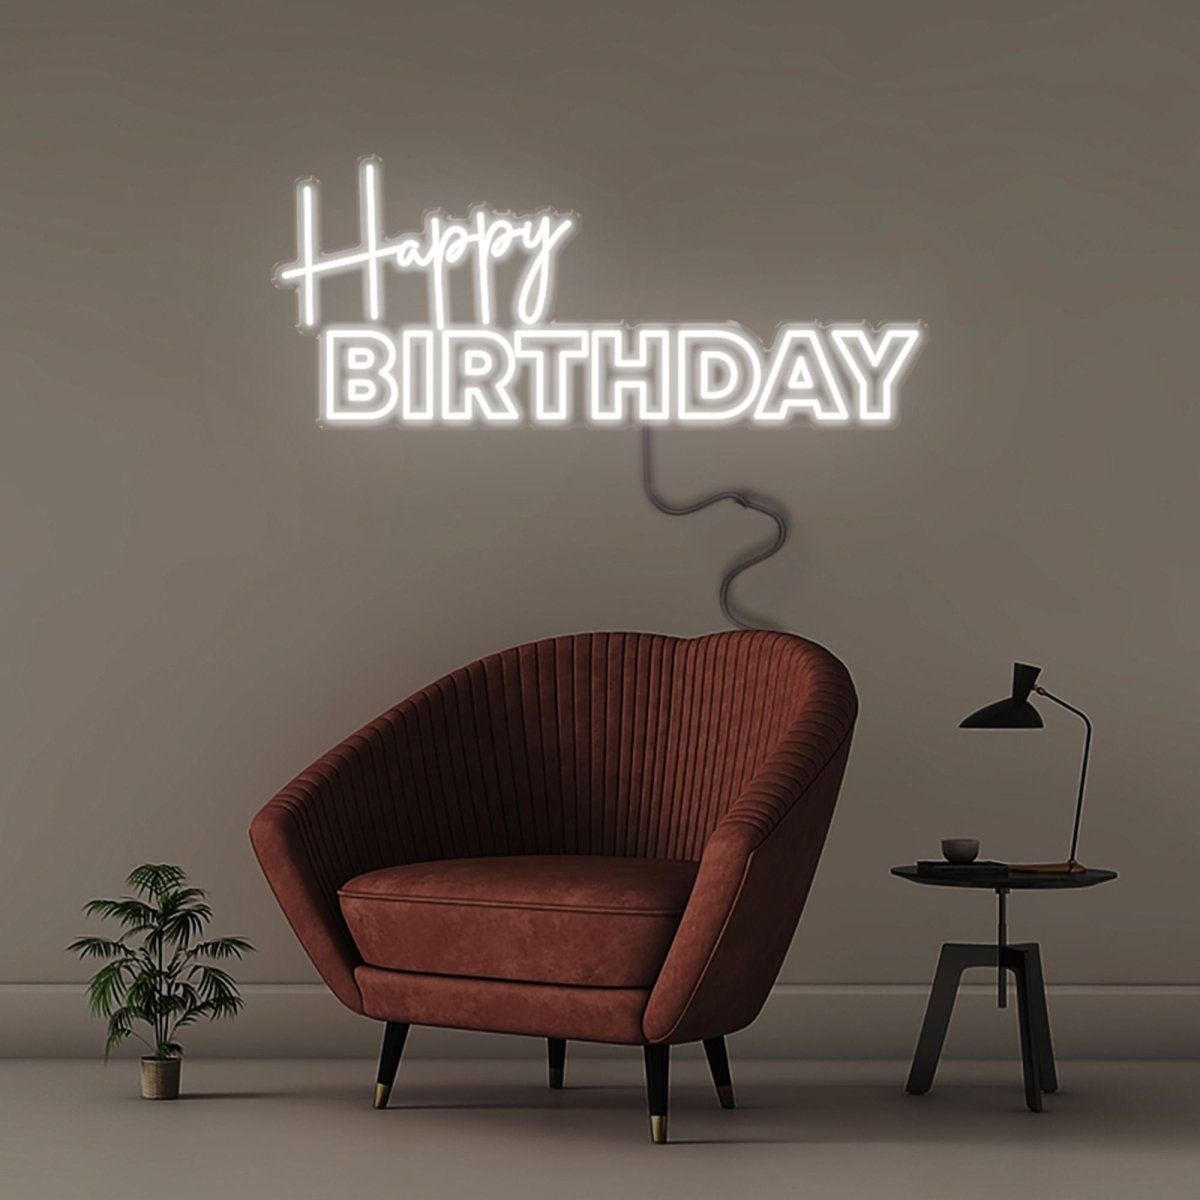 Happy Birthday - Neonific - LED Neon Signs - 61cm (24") - Cool White